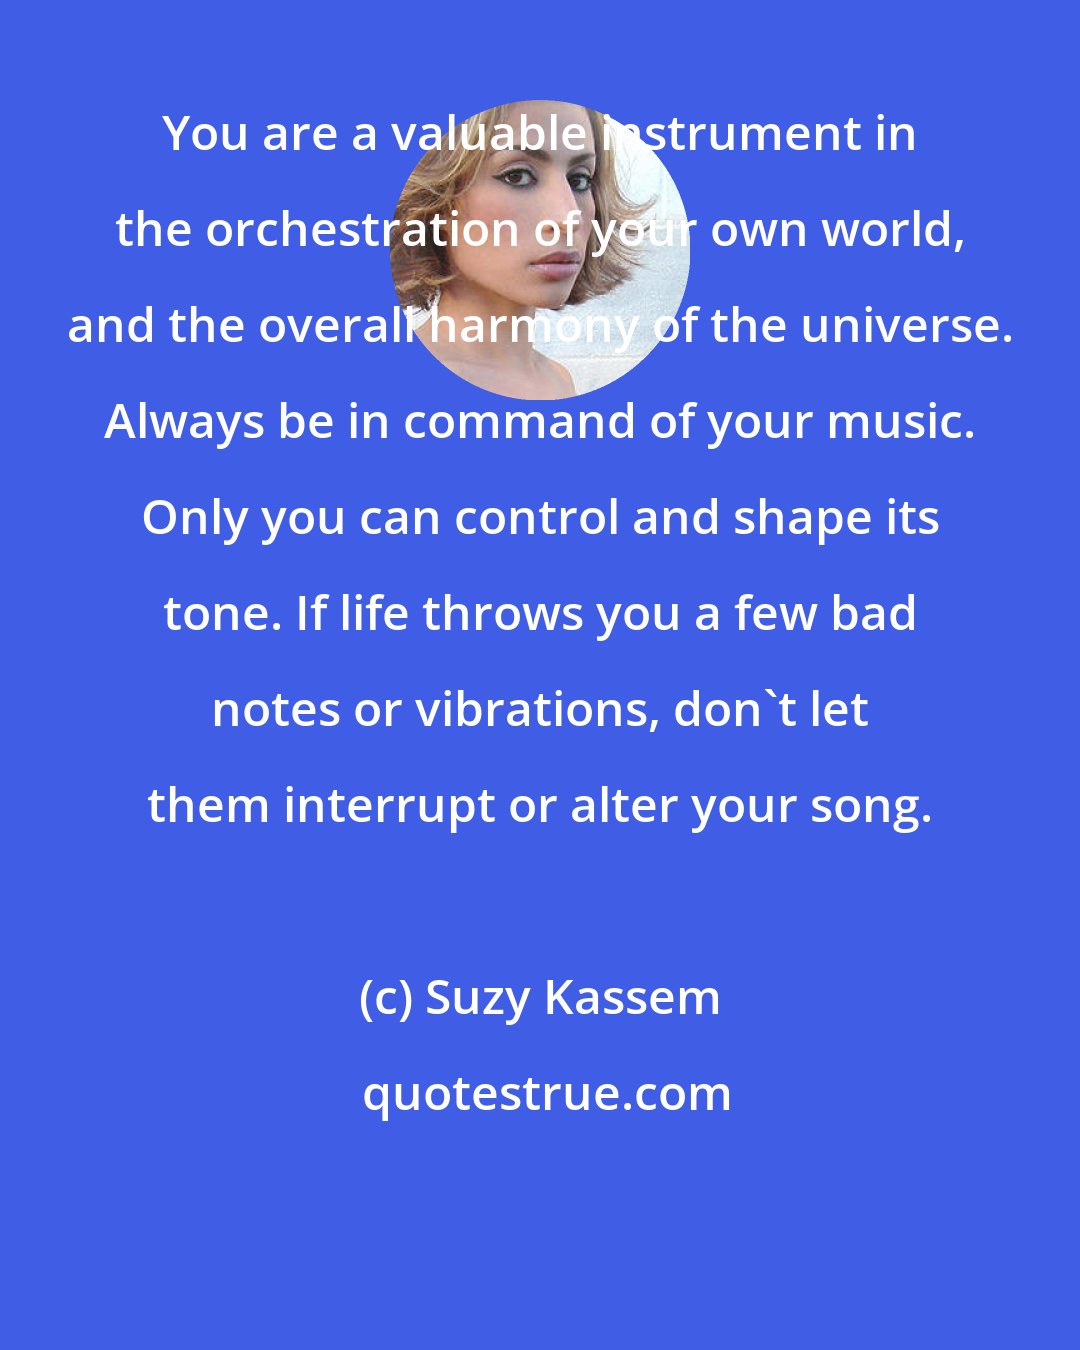 Suzy Kassem: You are a valuable instrument in the orchestration of your own world, and the overall harmony of the universe. Always be in command of your music. Only you can control and shape its tone. If life throws you a few bad notes or vibrations, don't let them interrupt or alter your song.